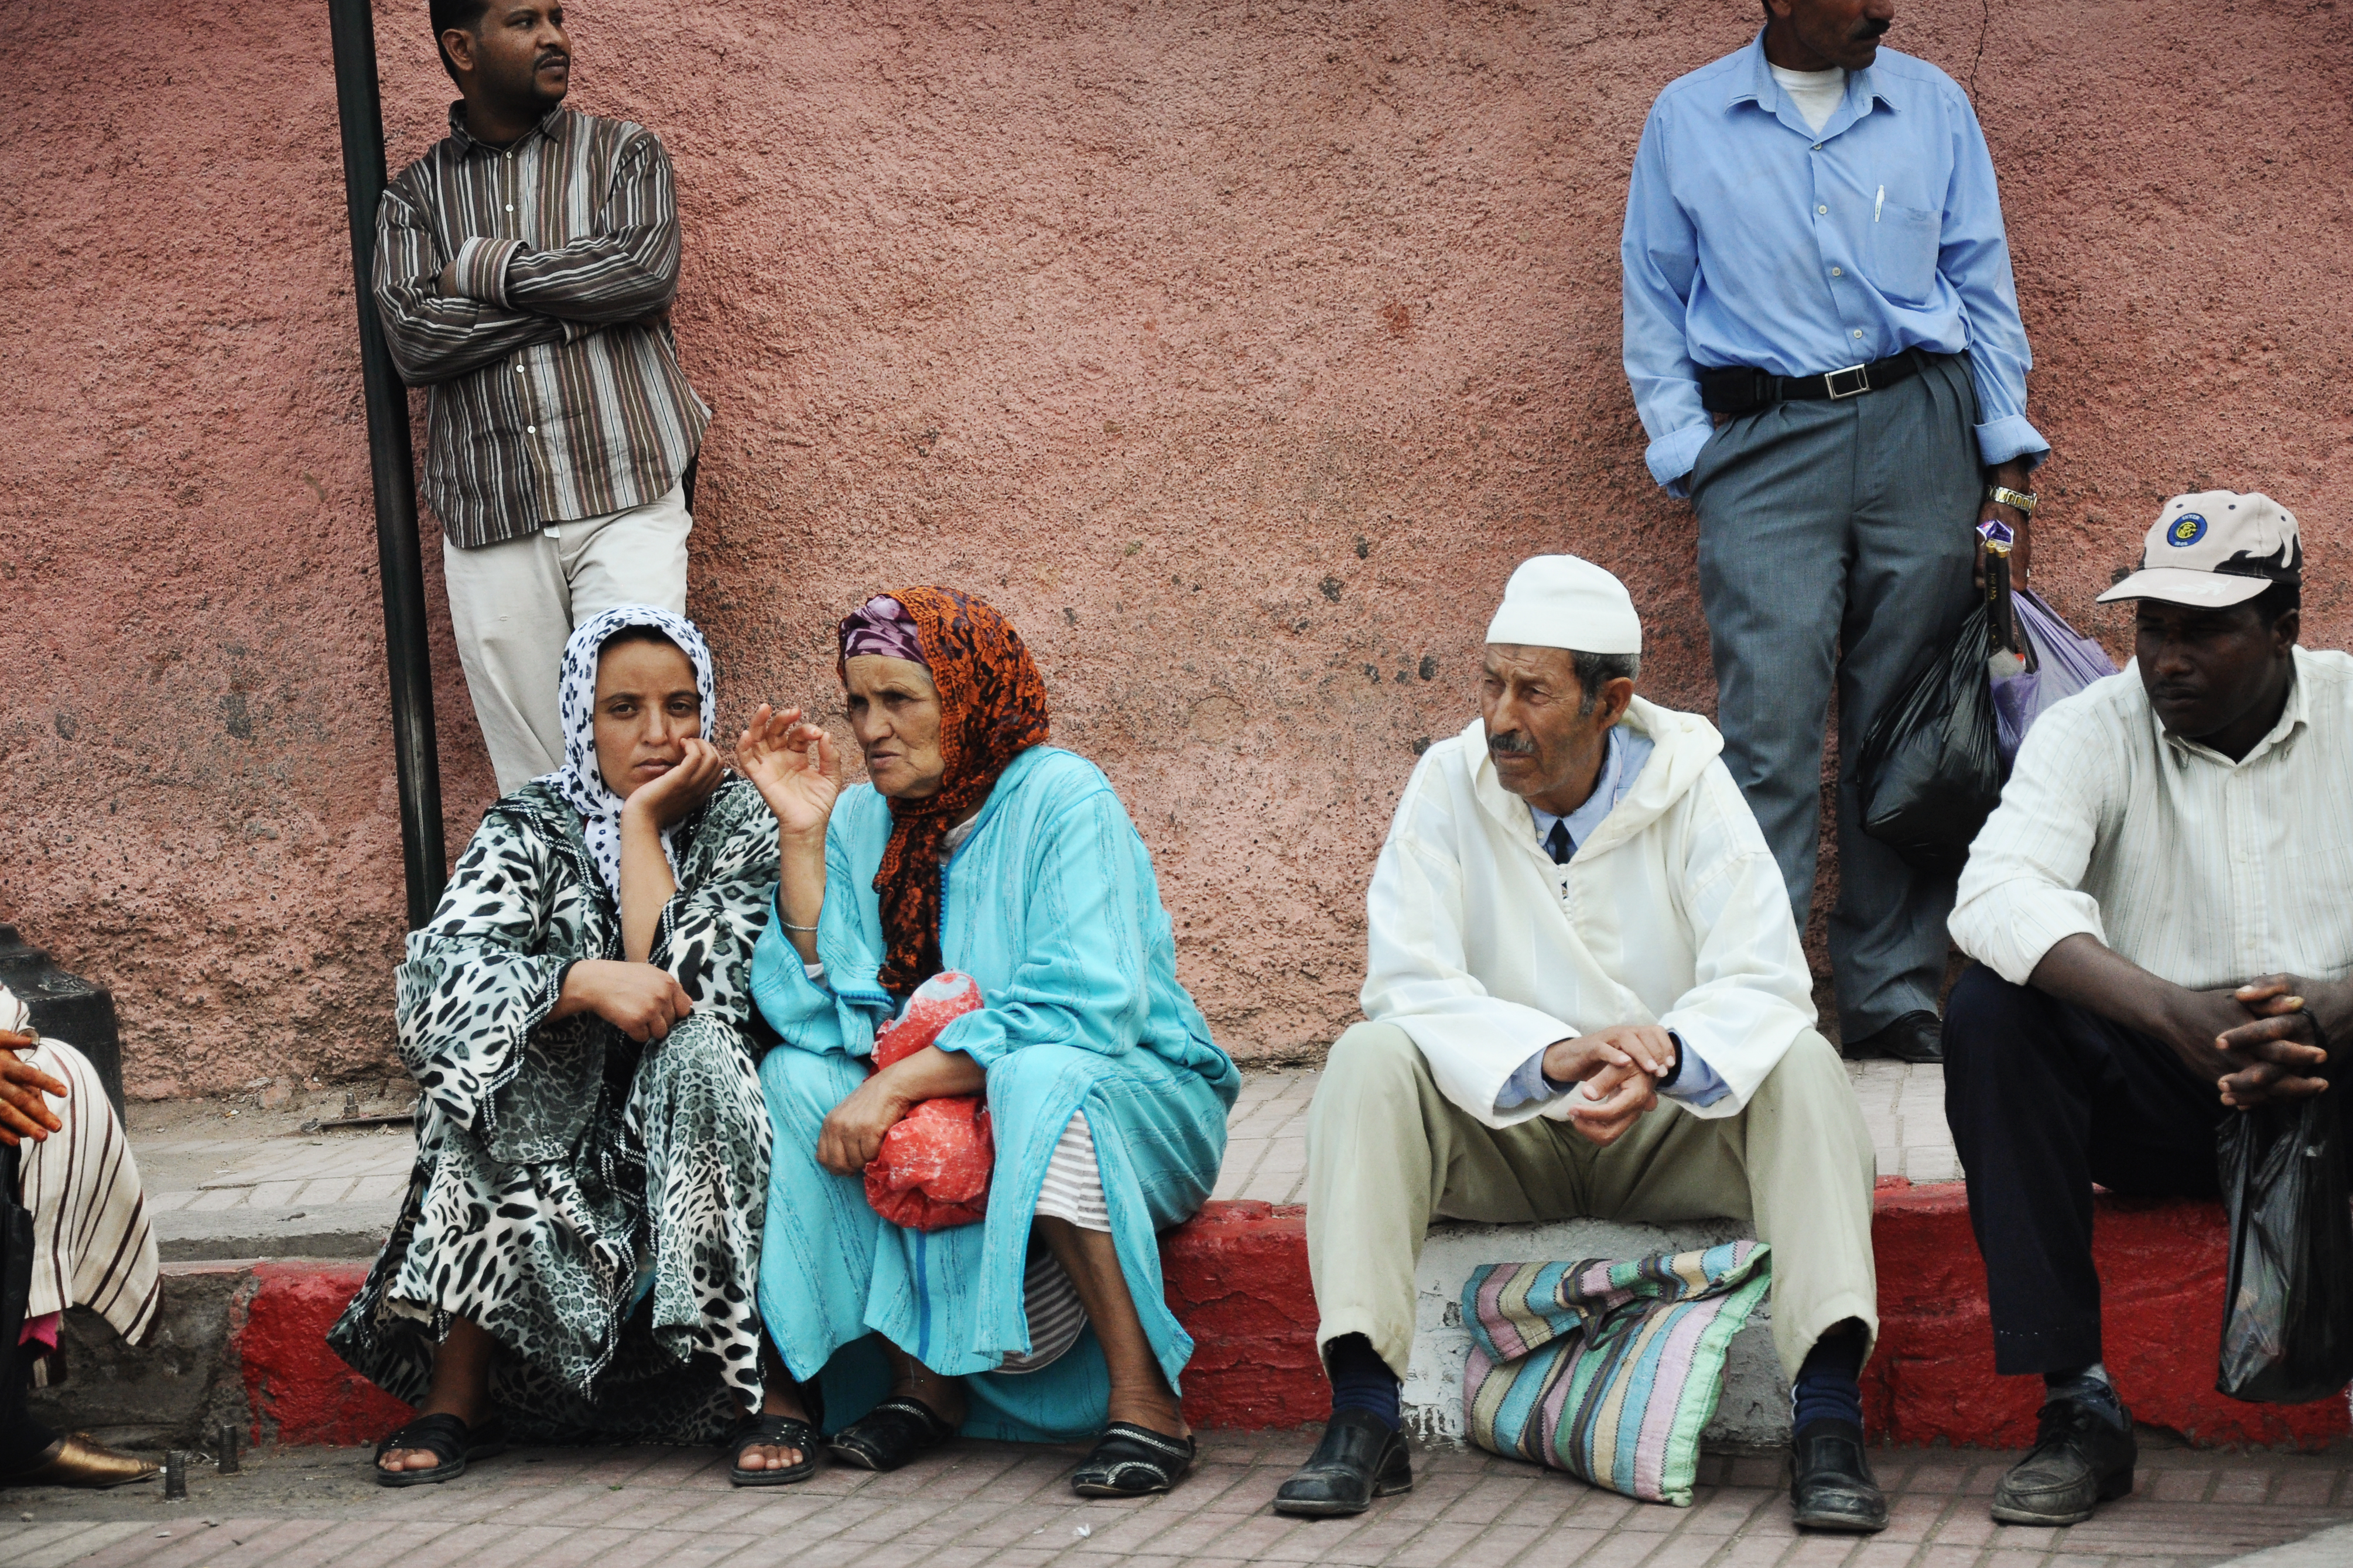 Waiting for public transport, Africa, Morocco, Waiting, Travel, HQ Photo